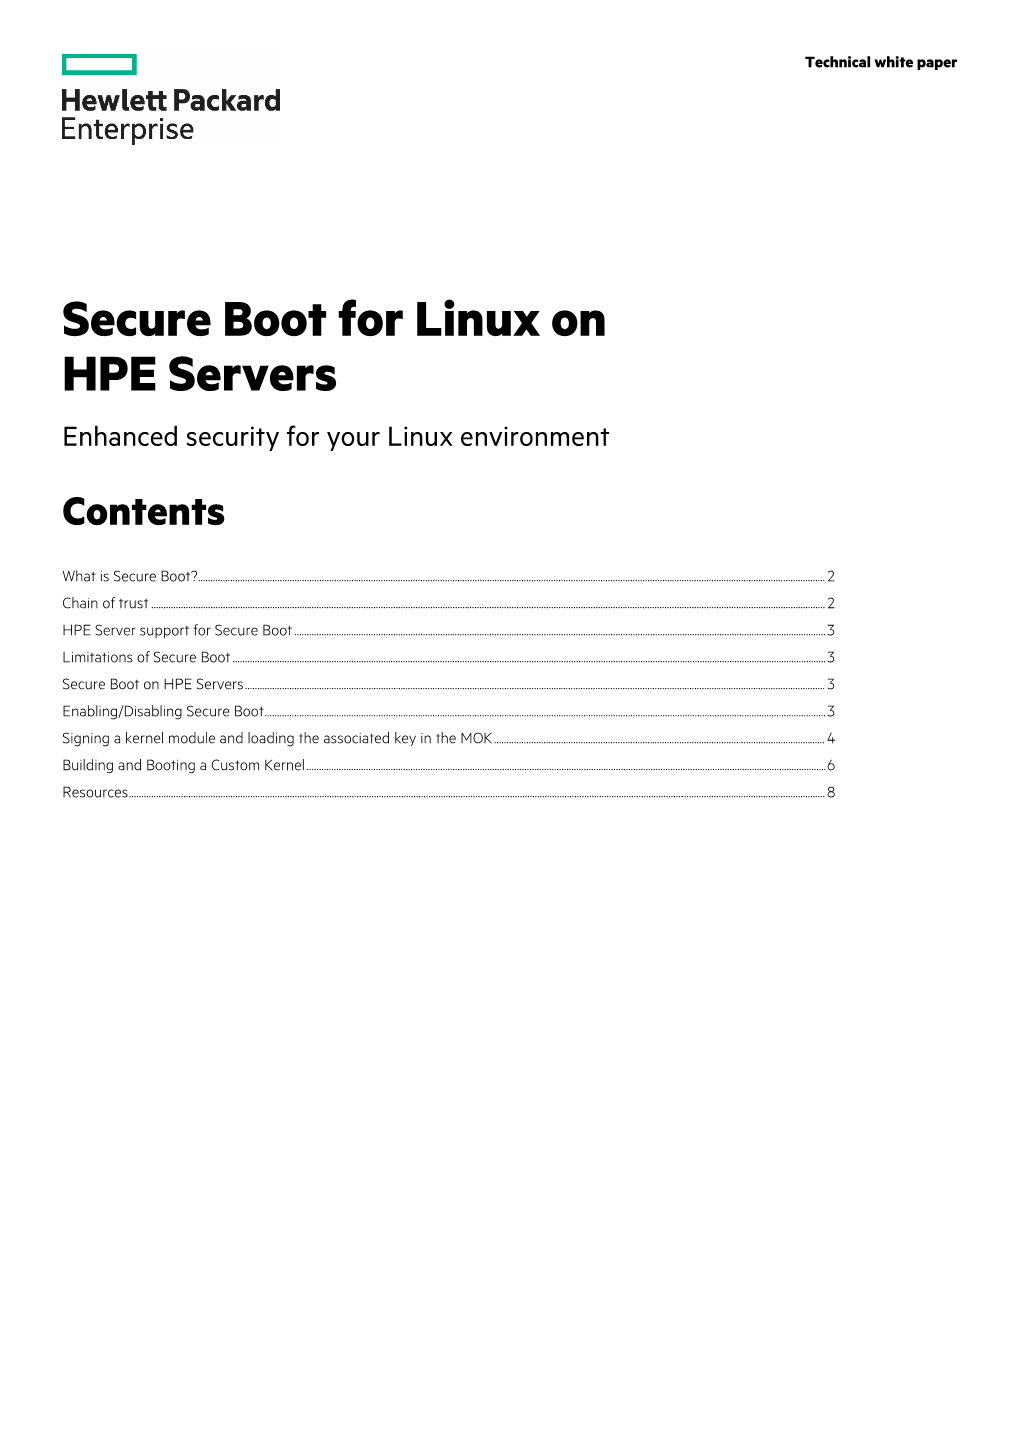 Secure Boot for Linux on HPE Servers Technical White Paper